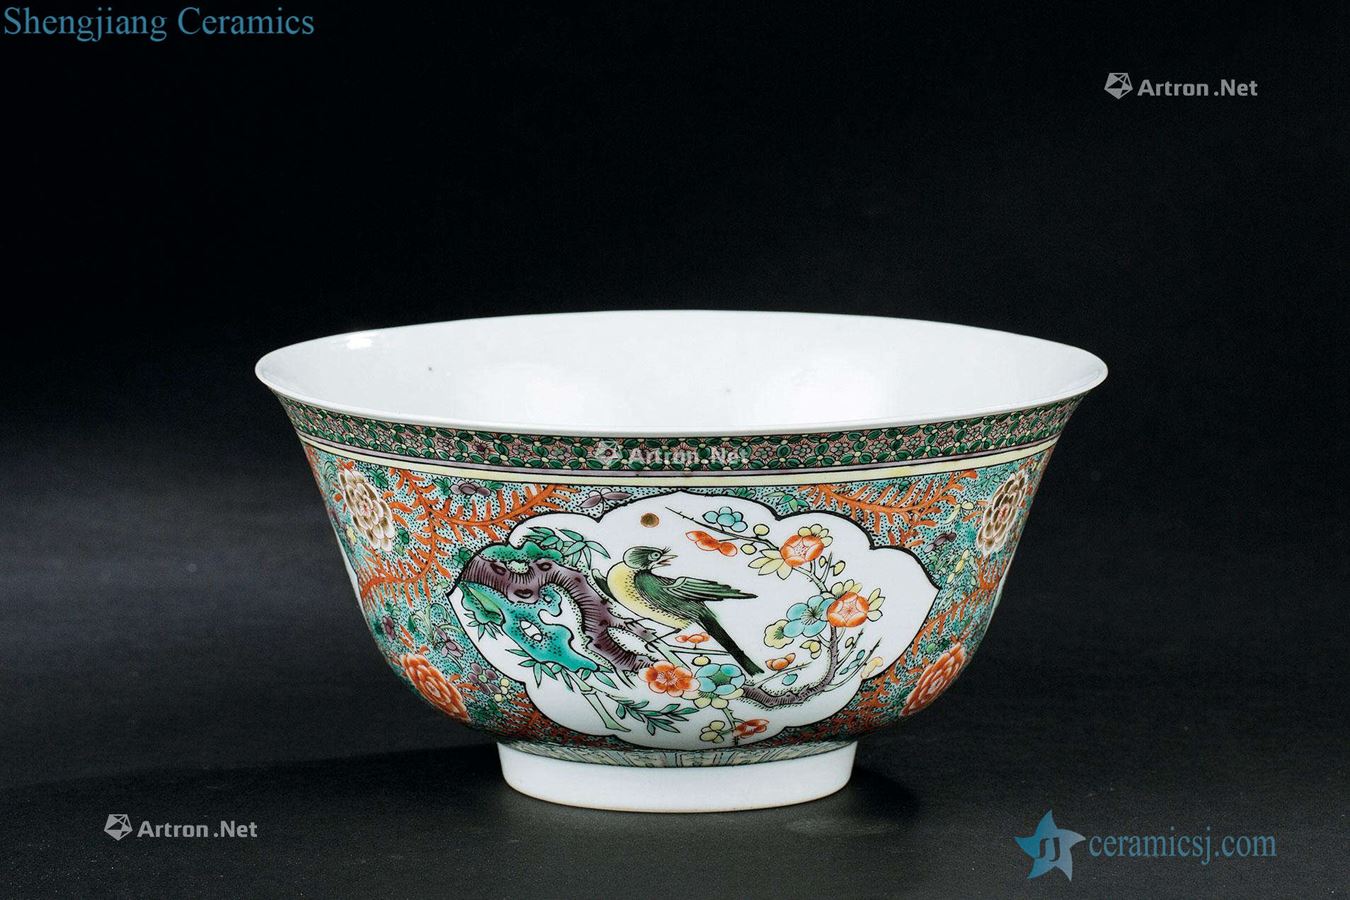 The qing emperor kangxi (1662-1722), colorful medallion flower-and-bird green-splashed bowls